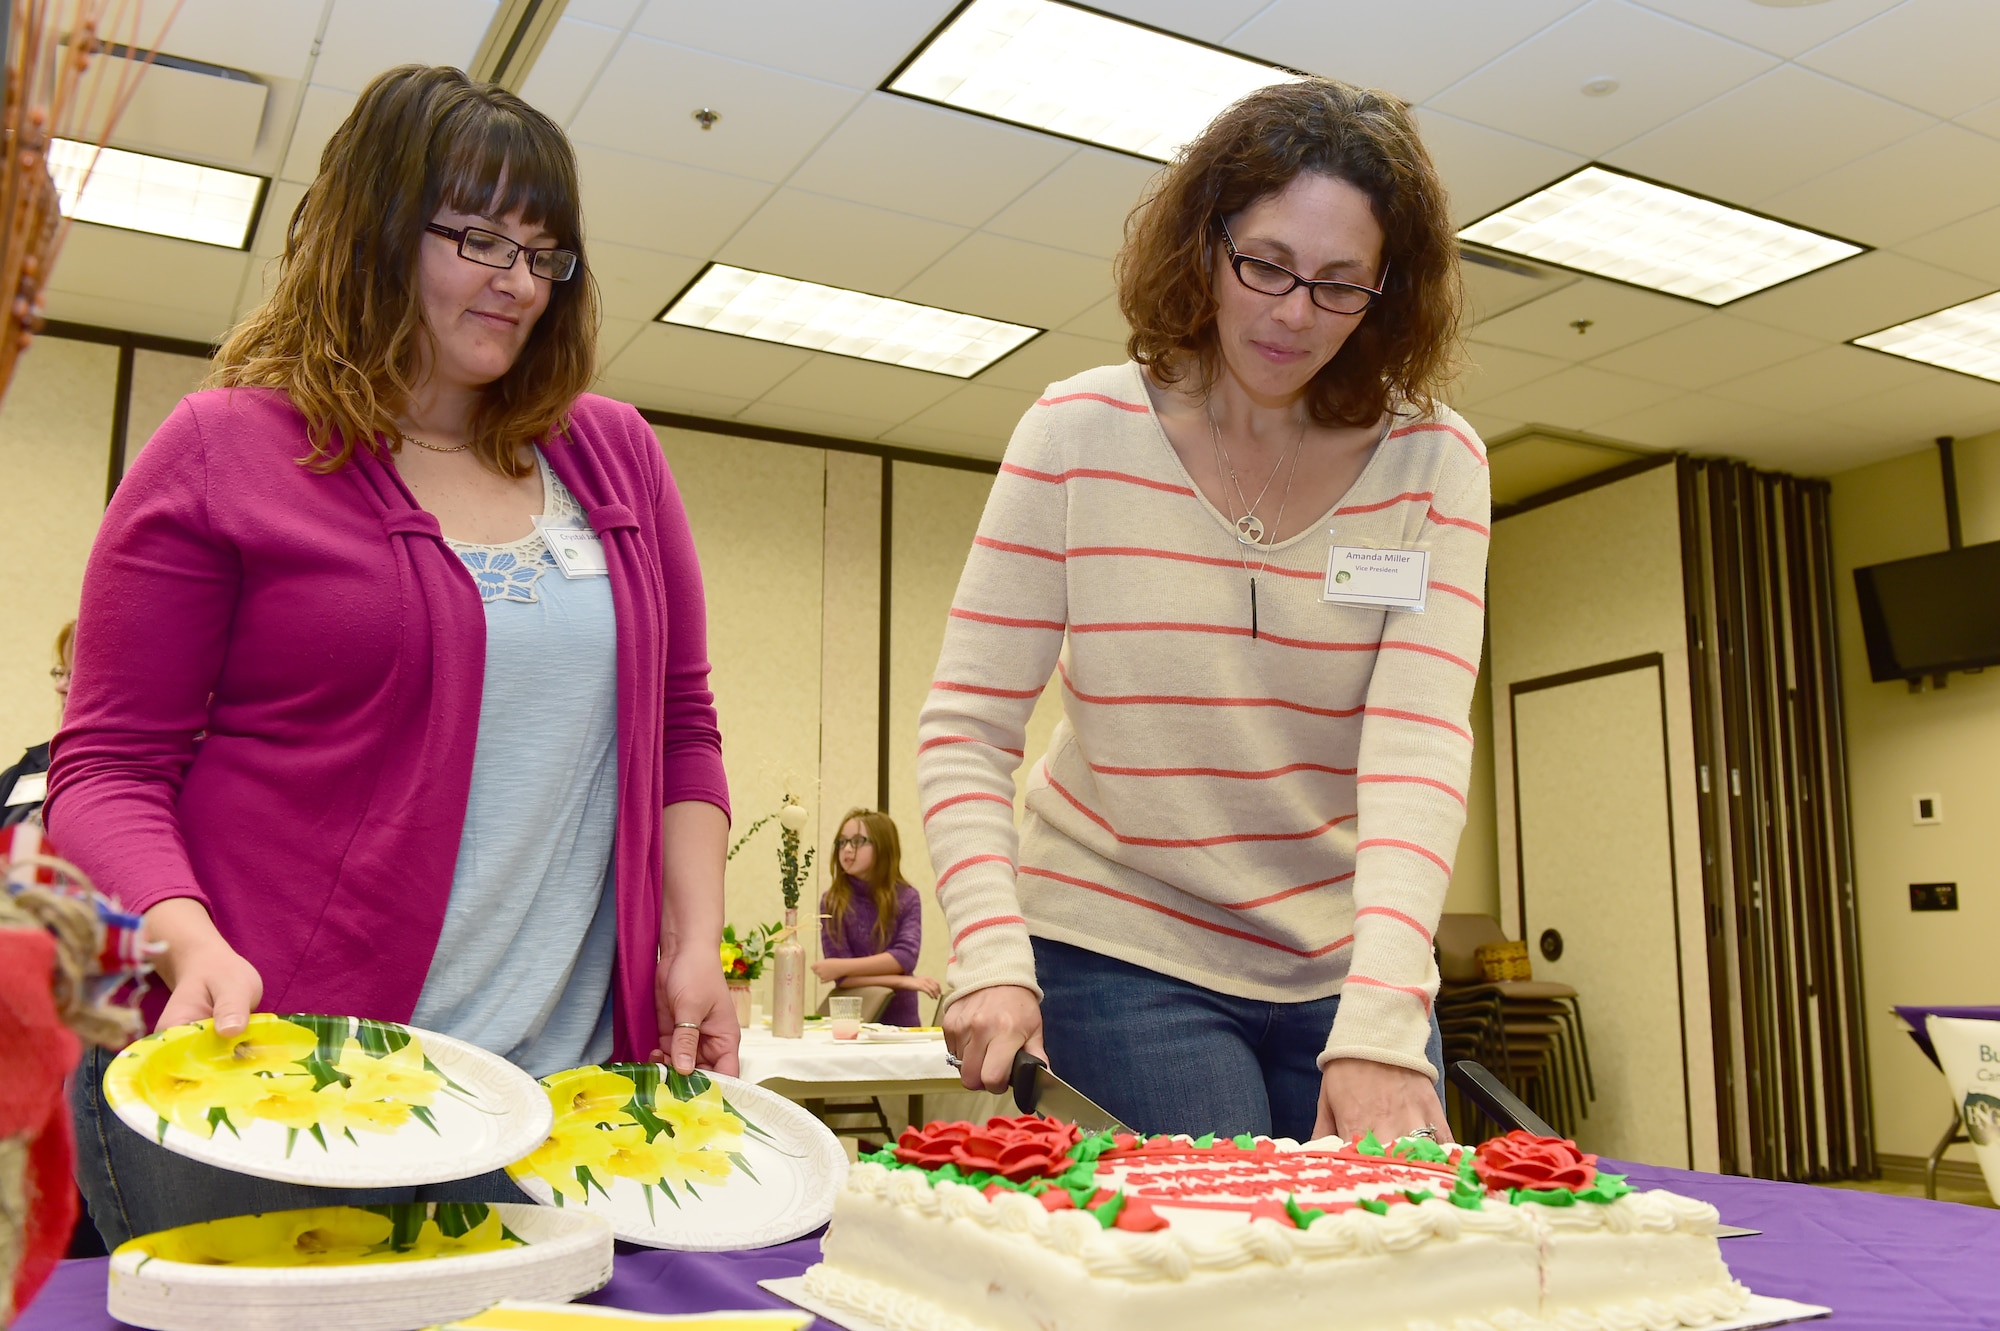 Amanda Miller, Buckley Spouses’ Group Vice President, cuts a cake celebrating the scholarship winners May 9, 2015, on Buckley Air Force Base, Colo. The Spouses’ Group raised and gave away $5,000 in scholarship funds to show support for individuals who are looking to advance through higher education. (U.S. Air Force photo by Airman 1st Class Luke W. Nowakowski/Released)